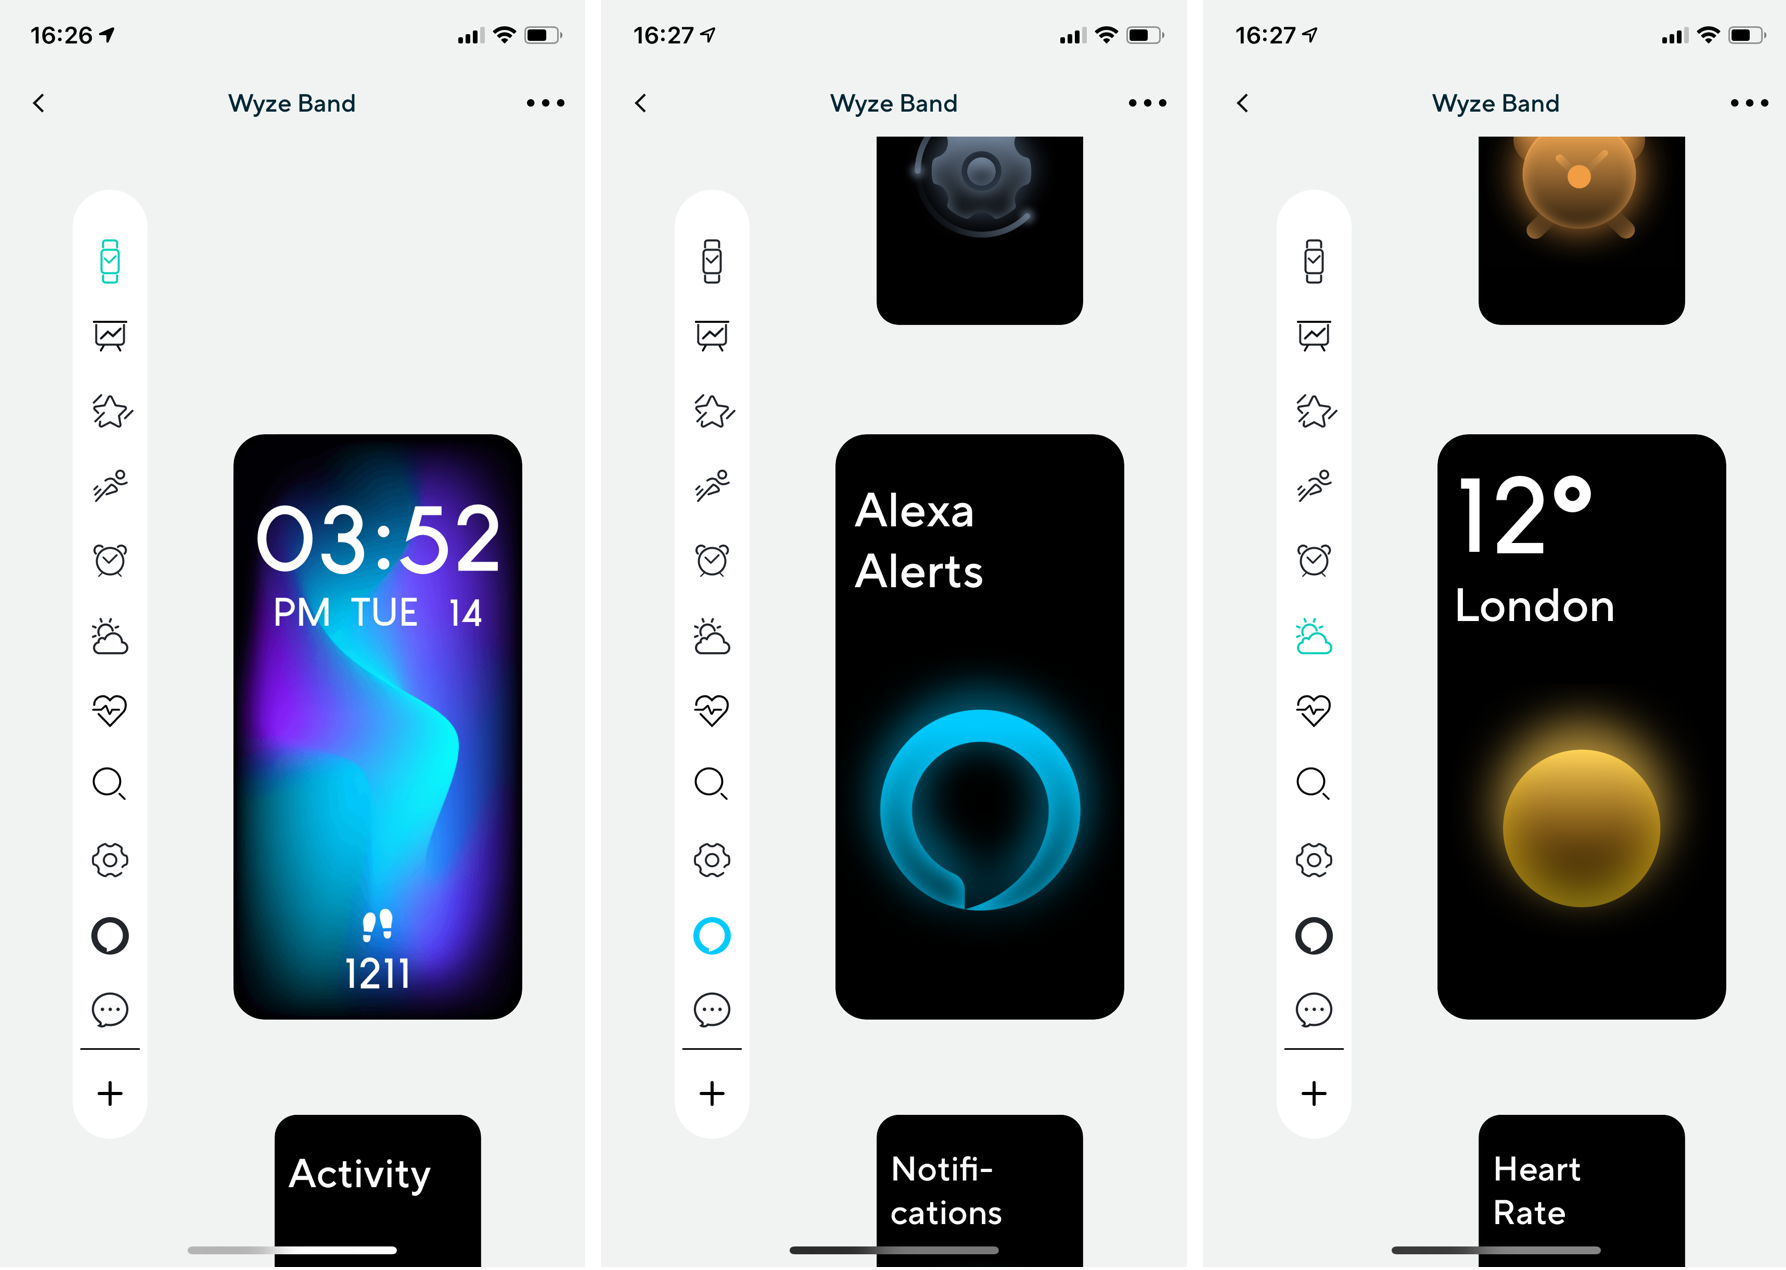 Wyze takes aim at Fitbit and Apple with new $25 fitness band and